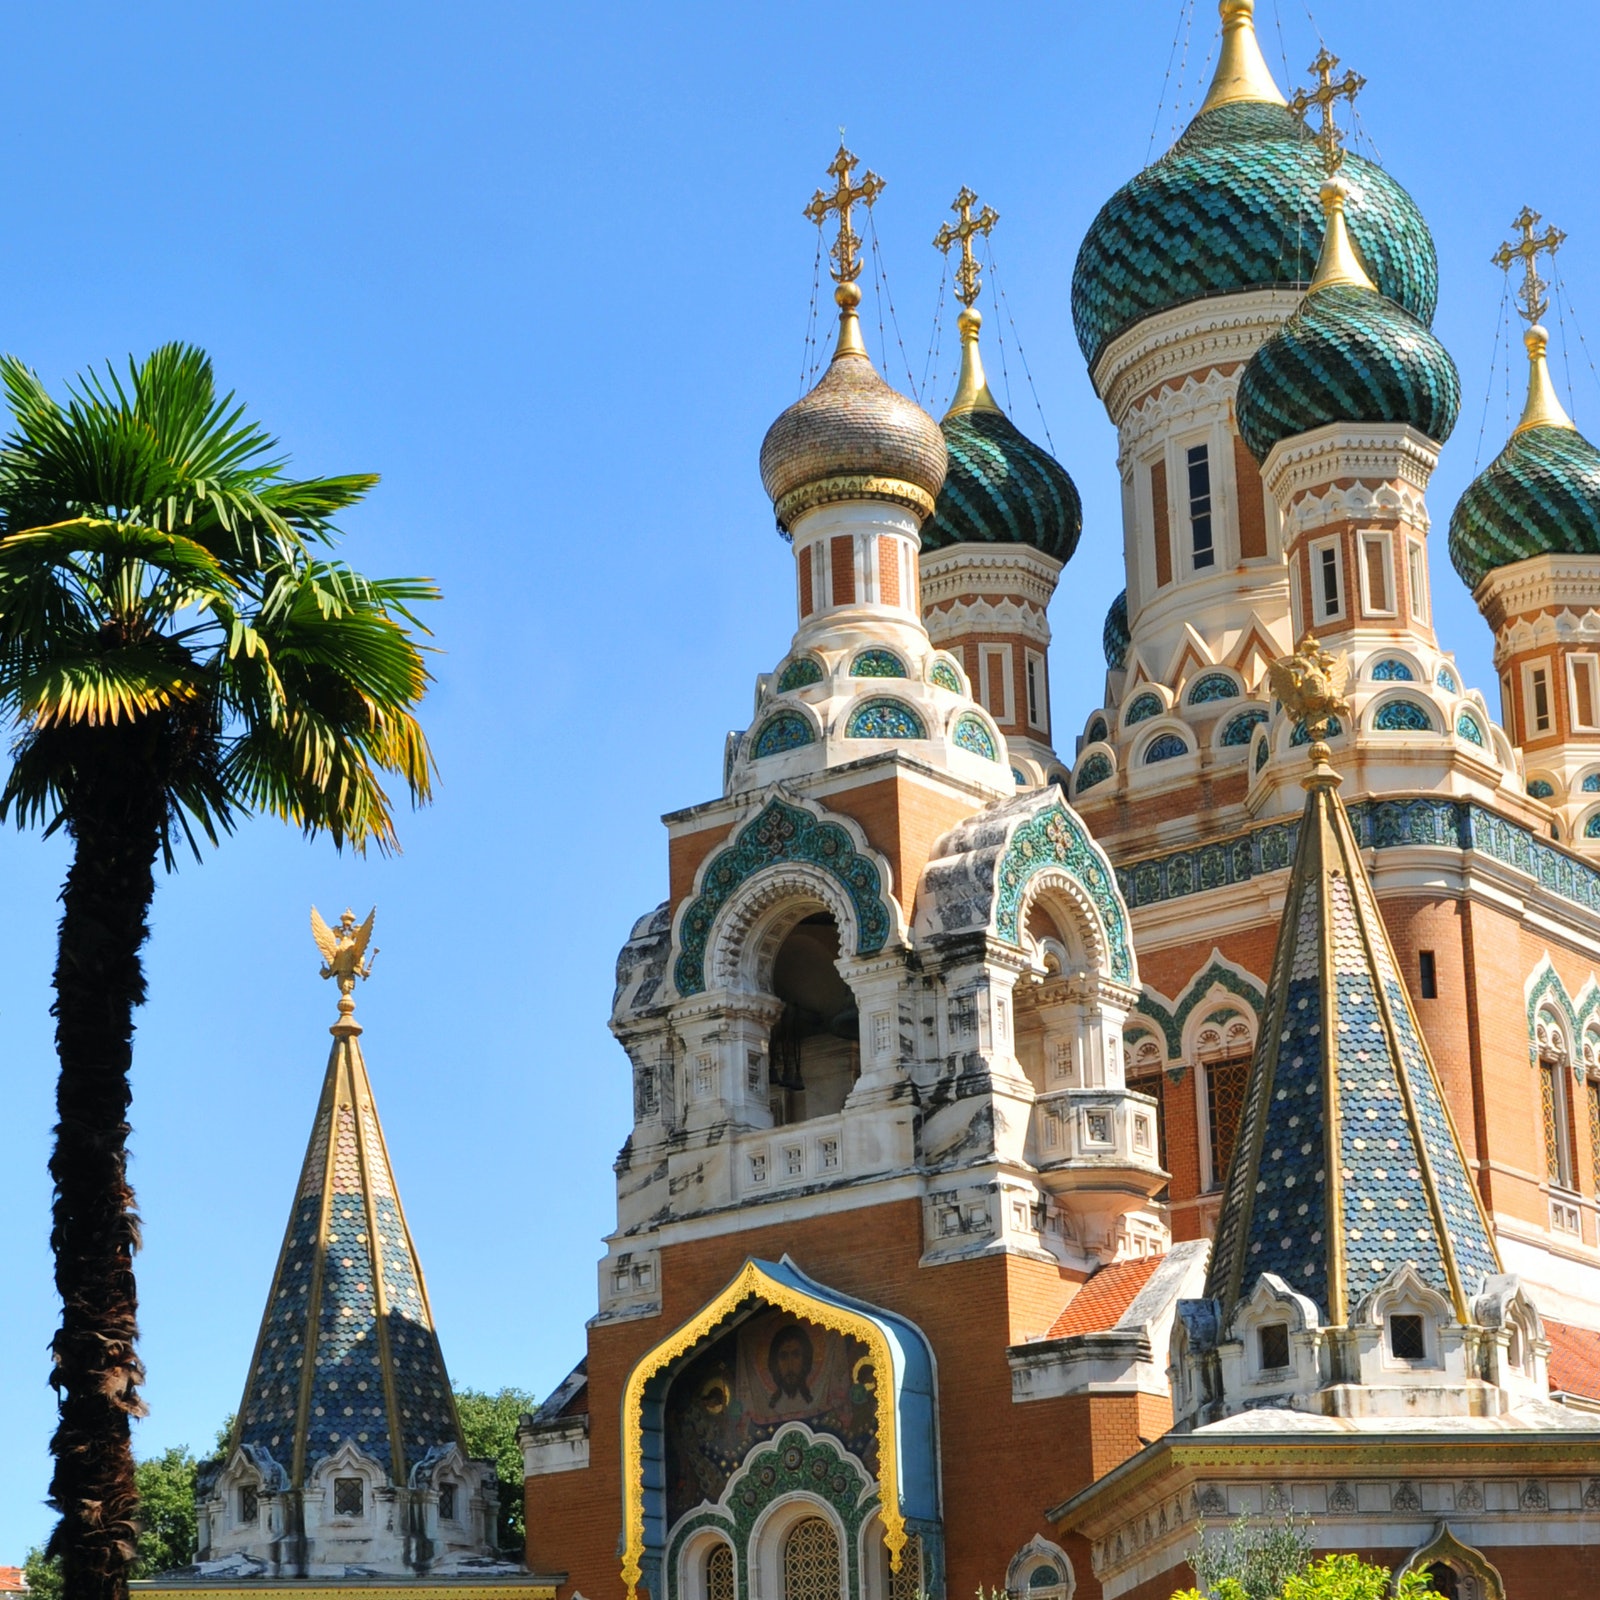 Russian Orthodox Cathedral Guided Tour + Highlights of Nice in France